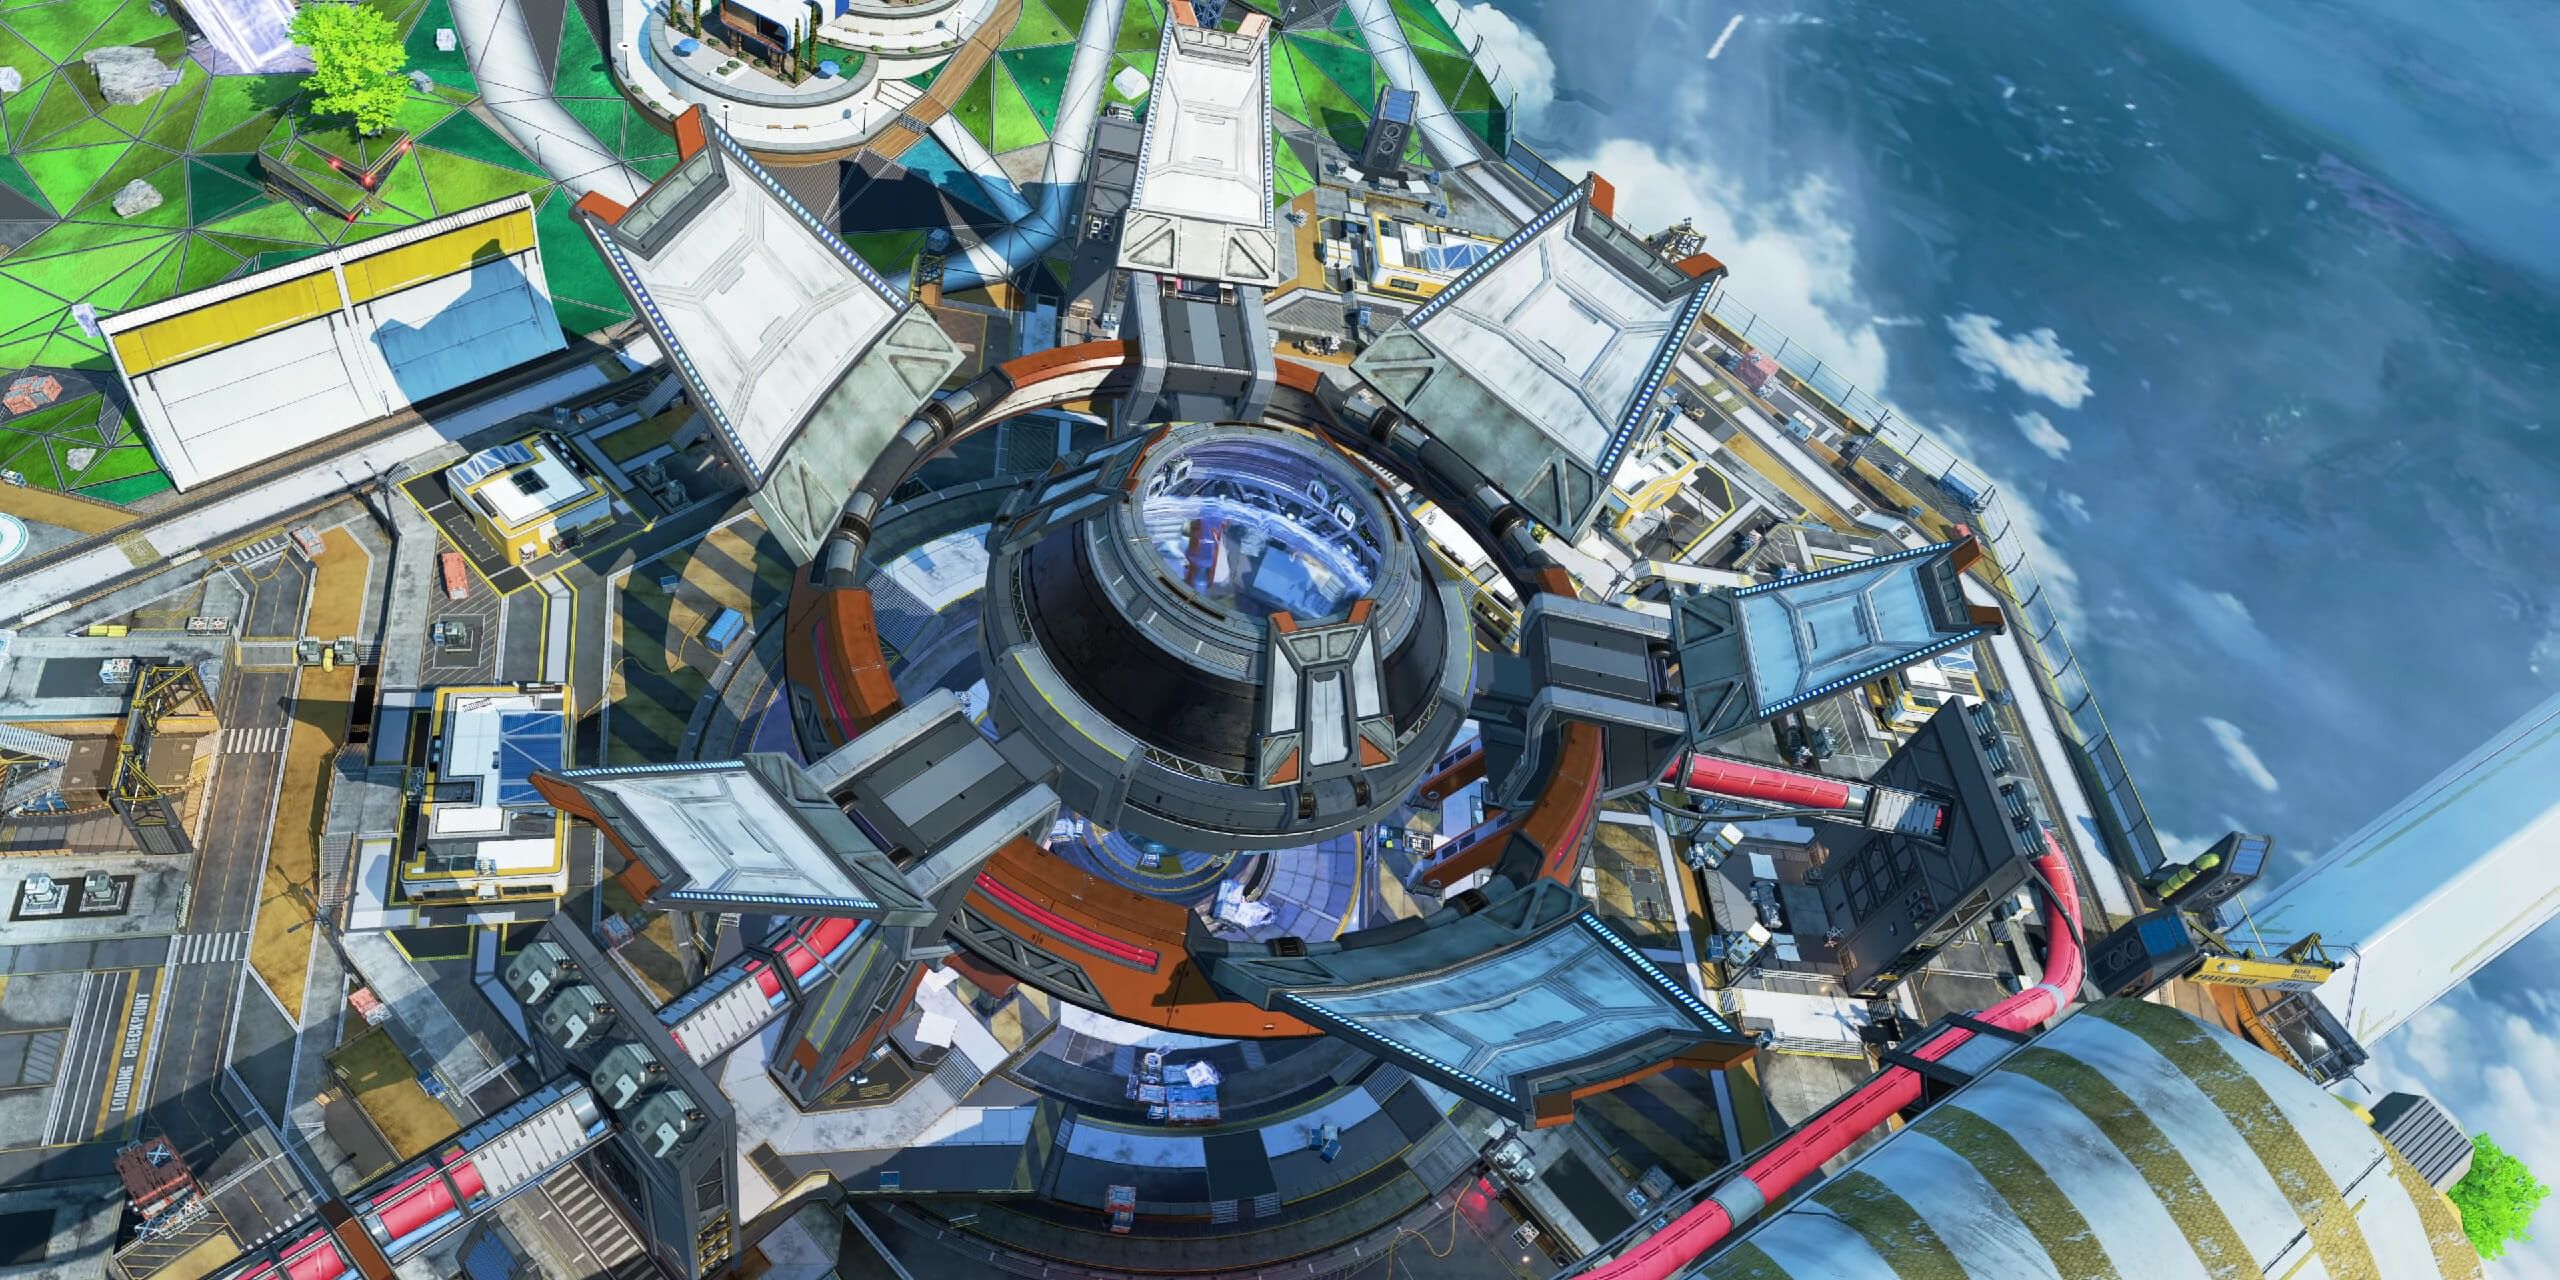 Phase Driver, a new POI on the Apex Legends map Olympus in Season 12 Defiance